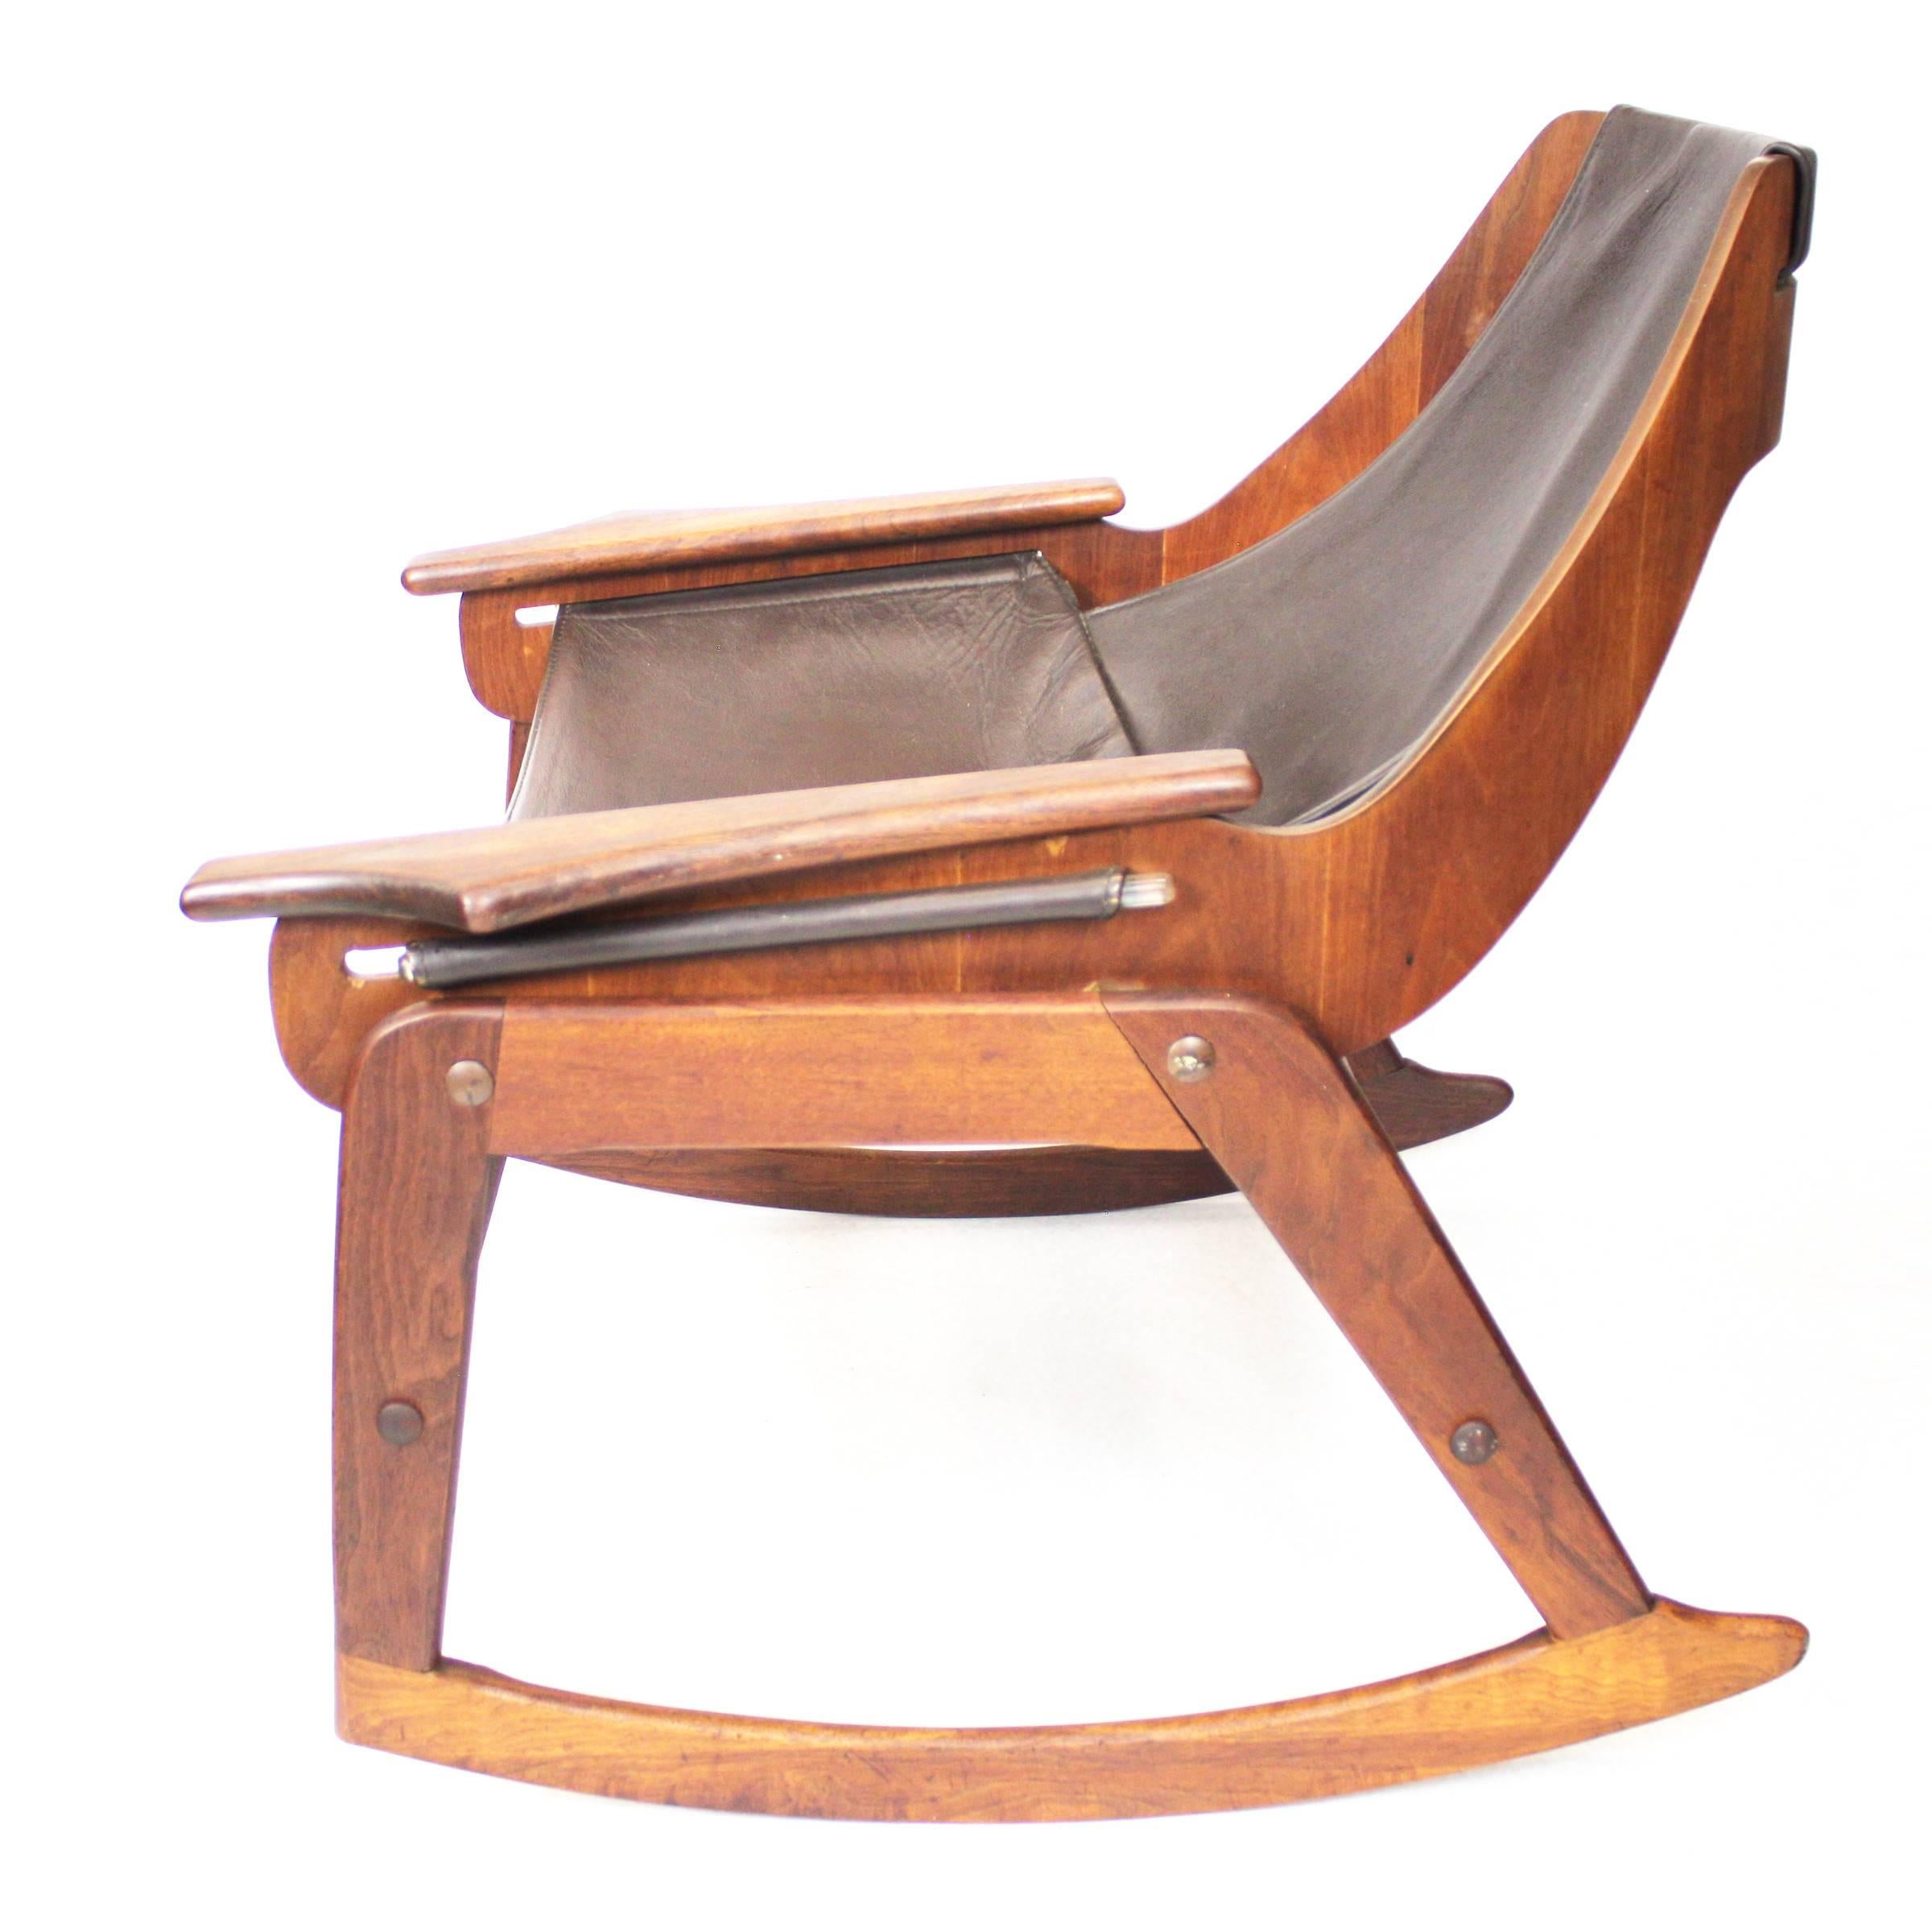 Laminated Mid-Century Modern Bent Plywood Leather Sling Rocking Chair by Jerry Johnson